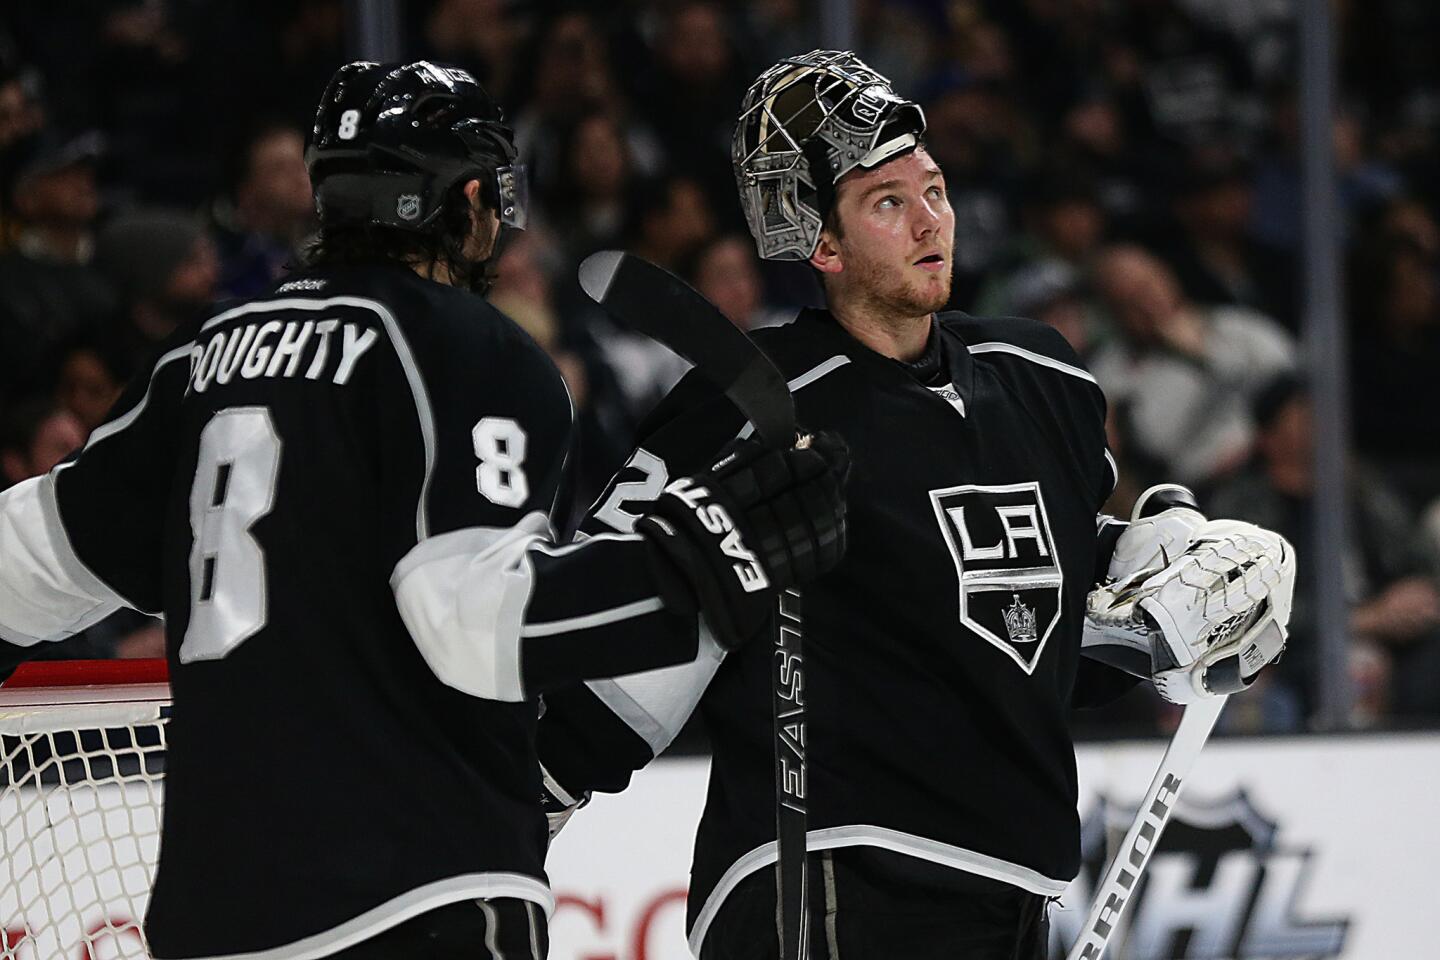 Kings goalie Jonathan Quick, right, talks with teammate Drew Doughty during a break in the action on Jan. 21, 2016.